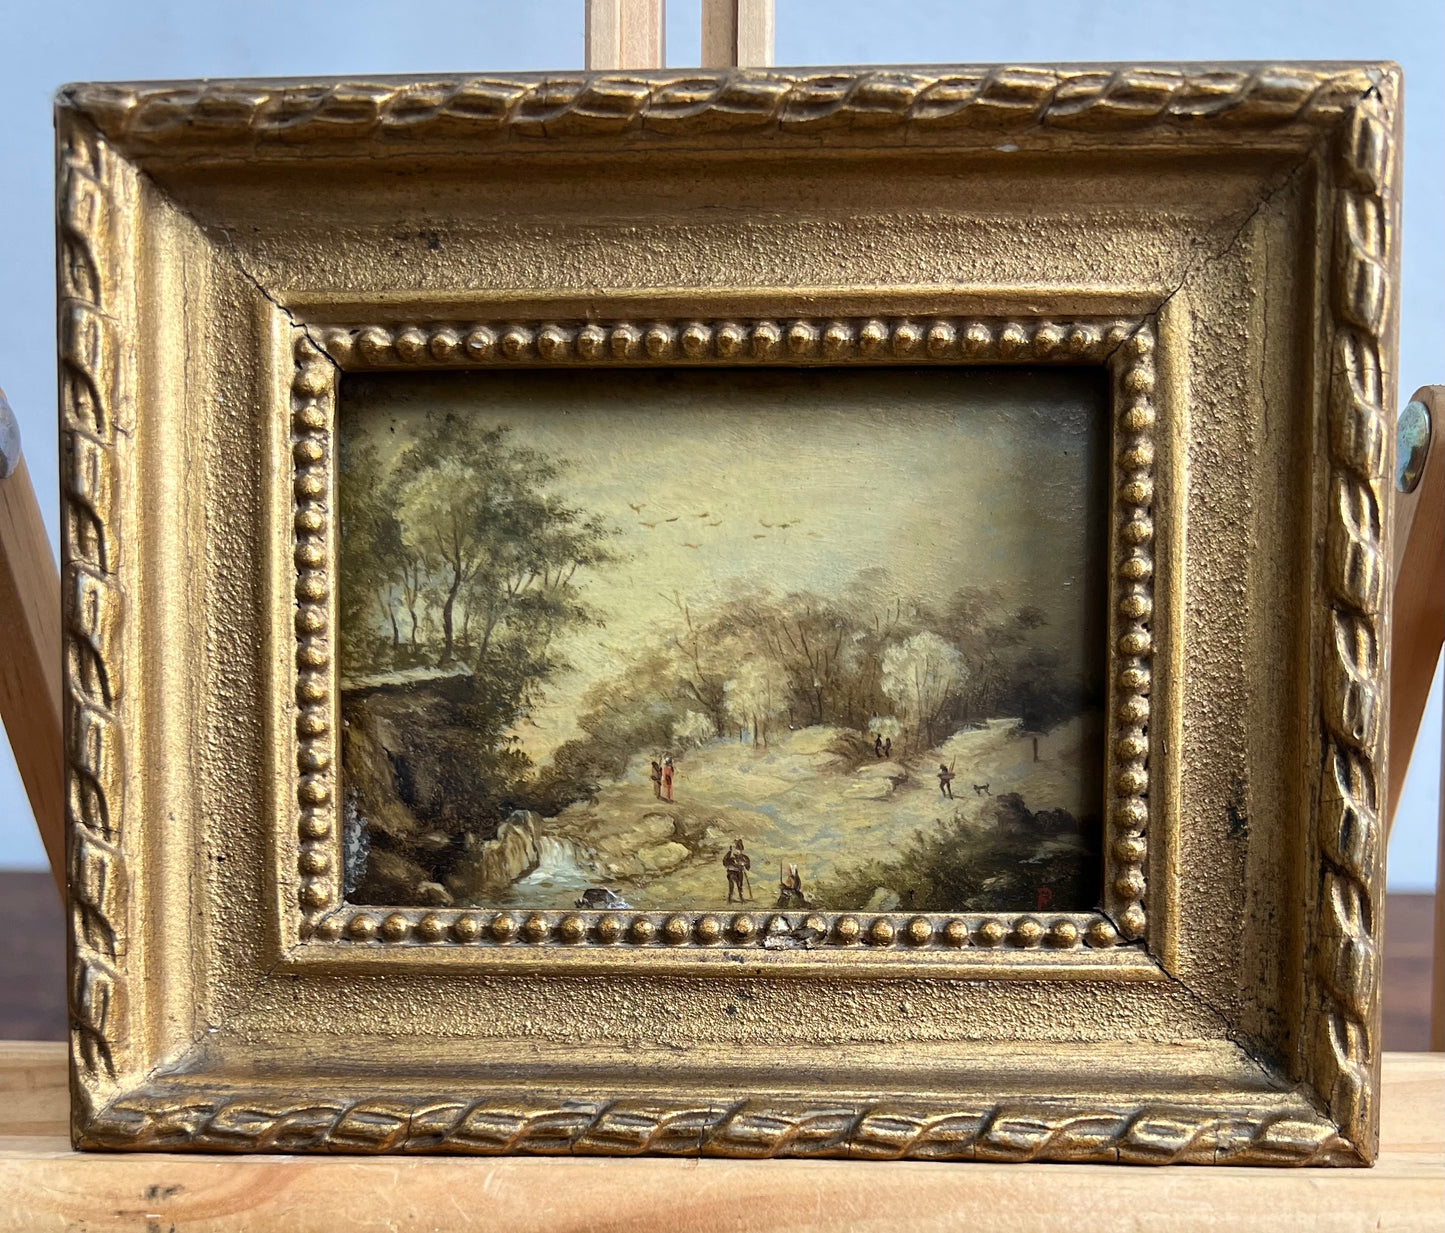 One of two late 18th early 19th century miniature still life paintings